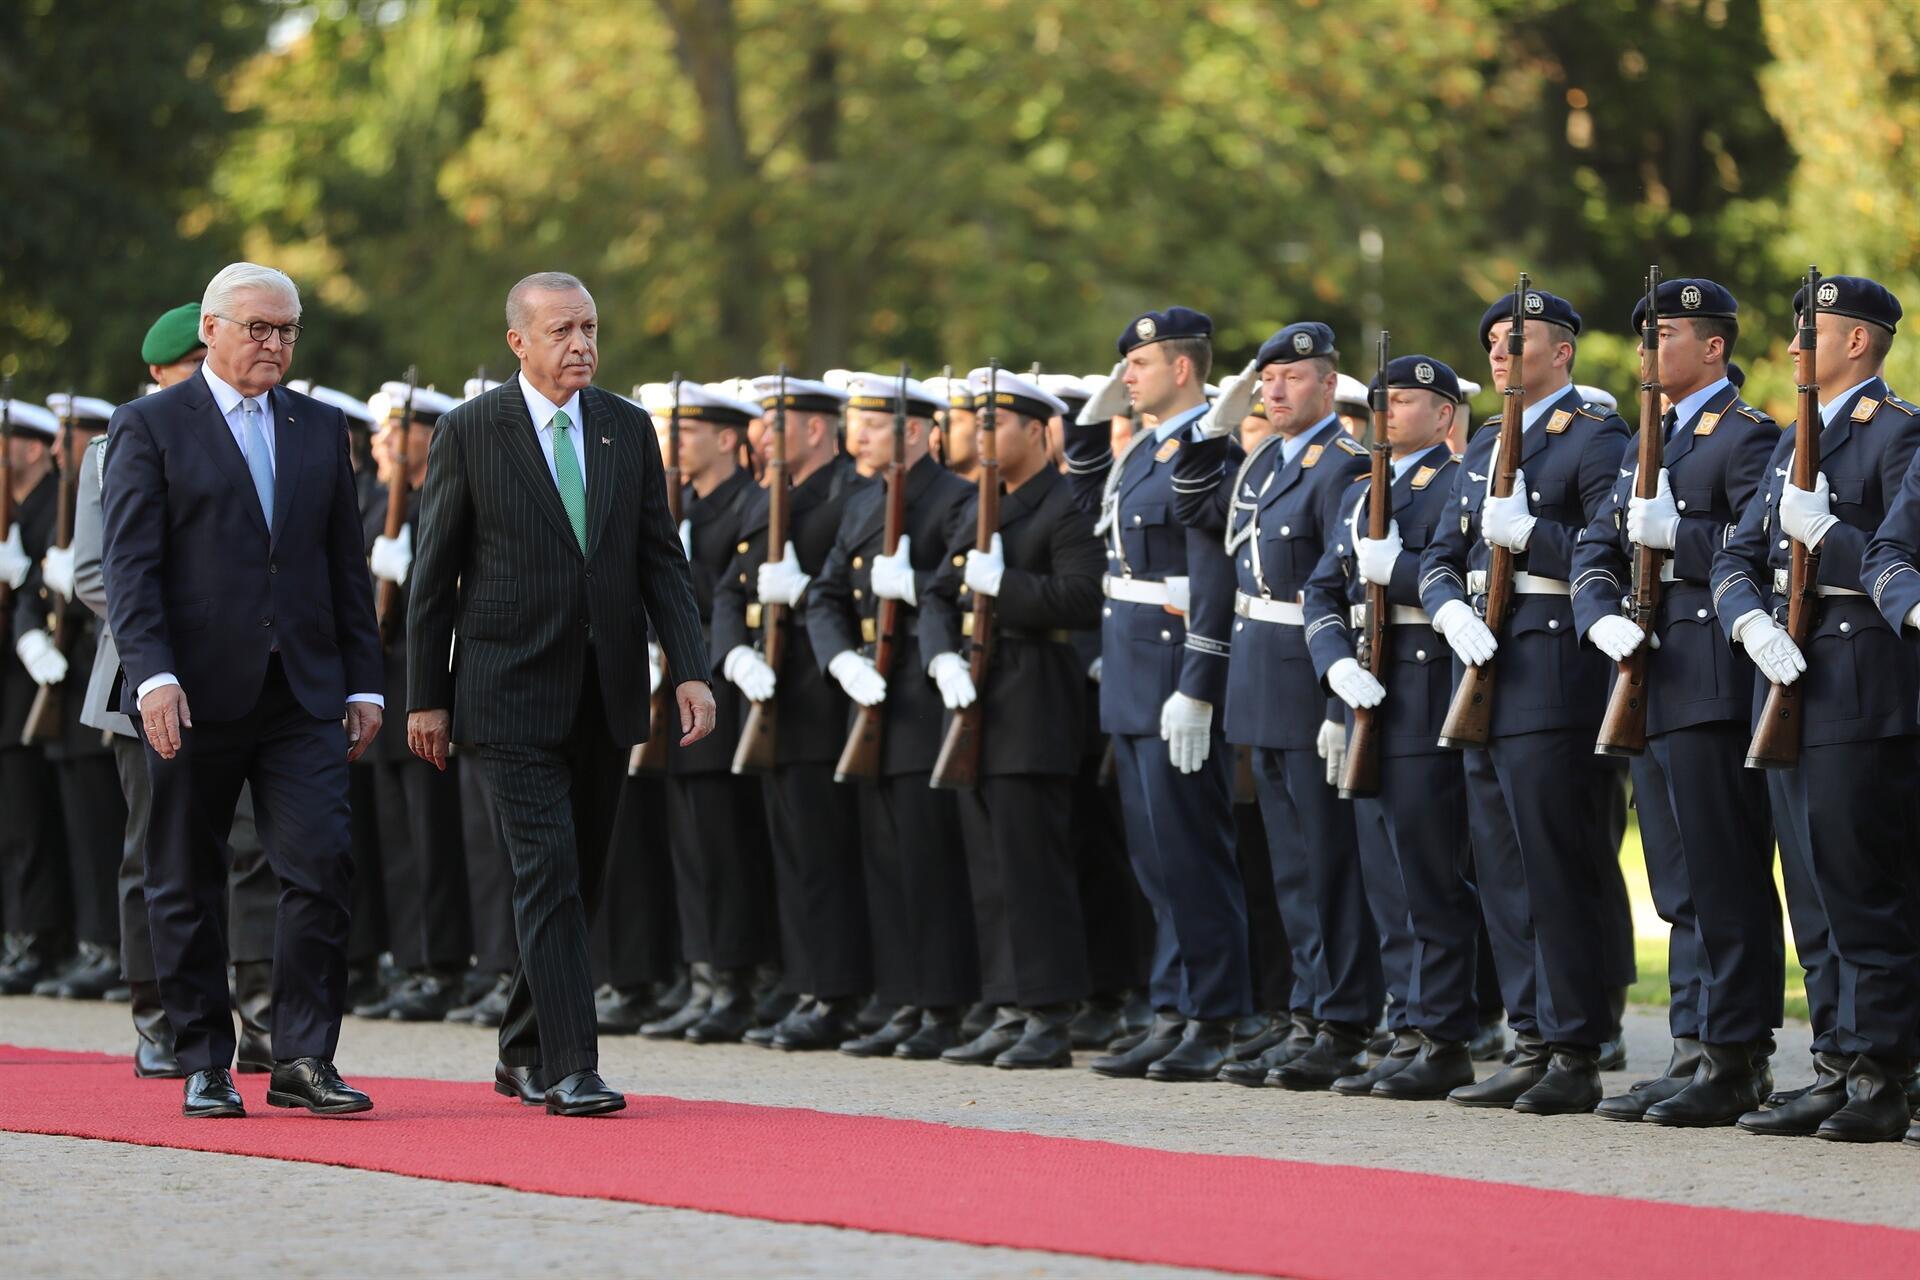 Turkish President Erdogan Received With Military Honors In Berlin Turkey News